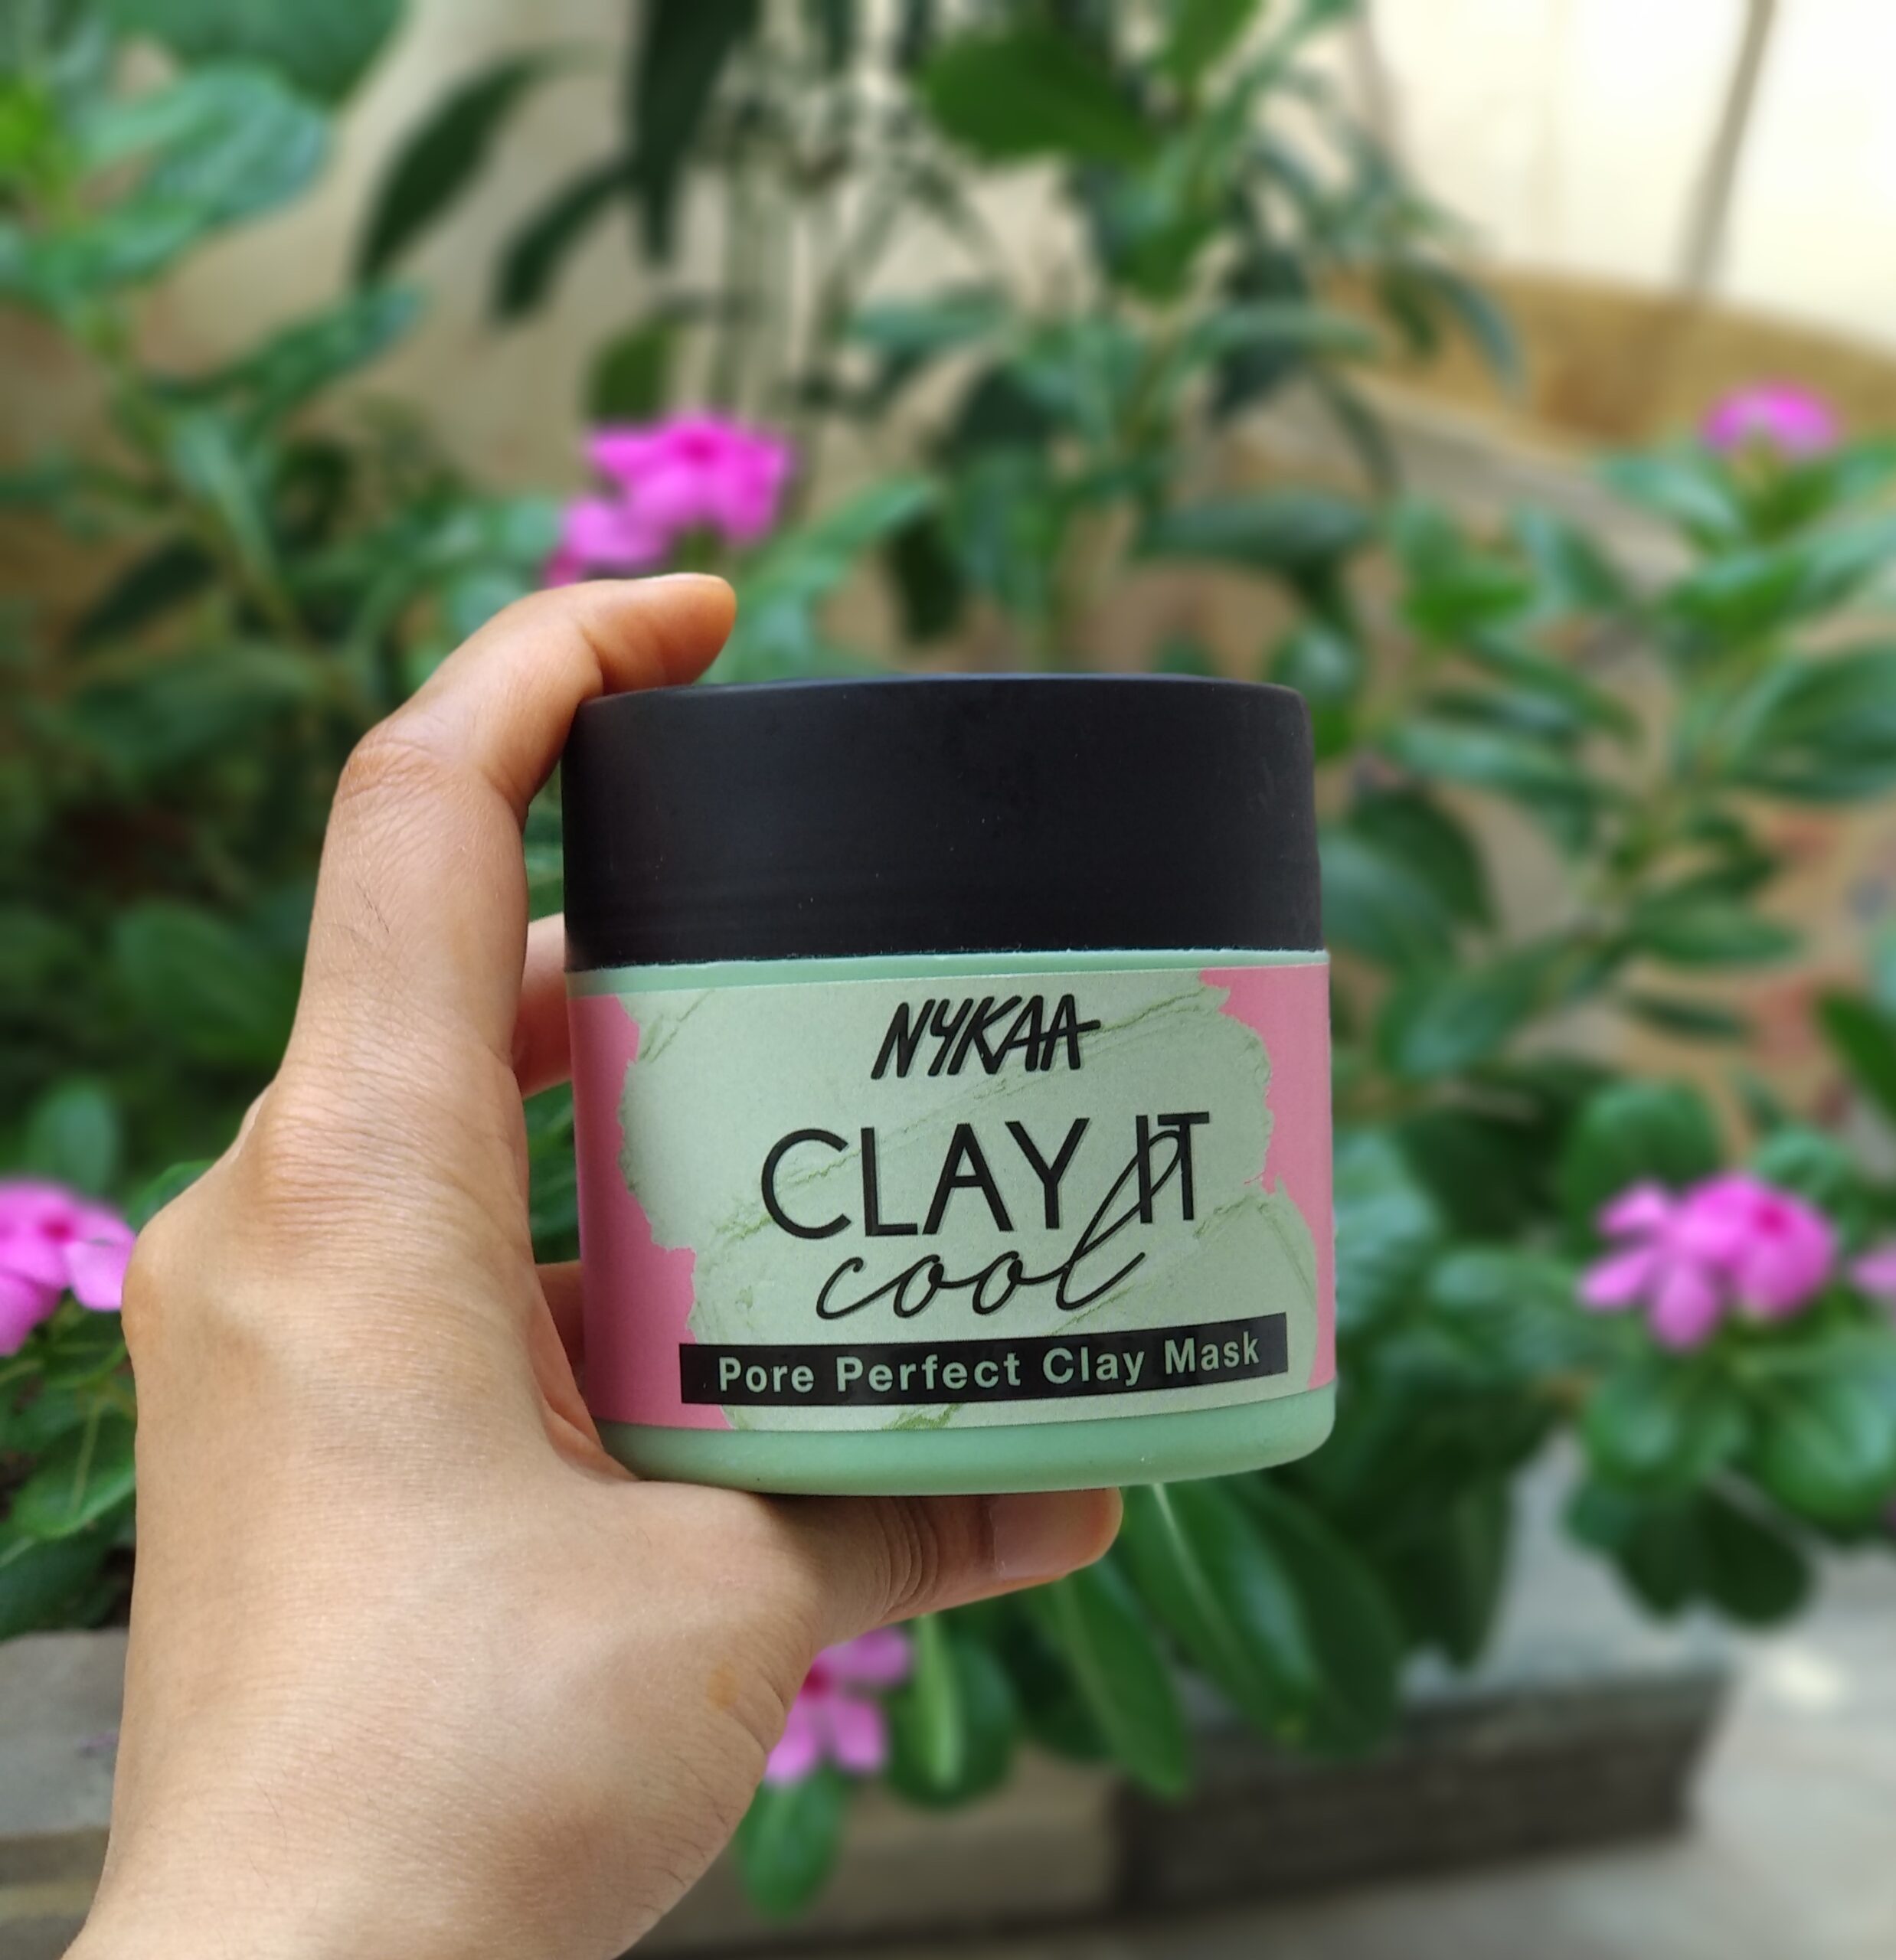 nykaa clay it cool pore perfect clay mask review